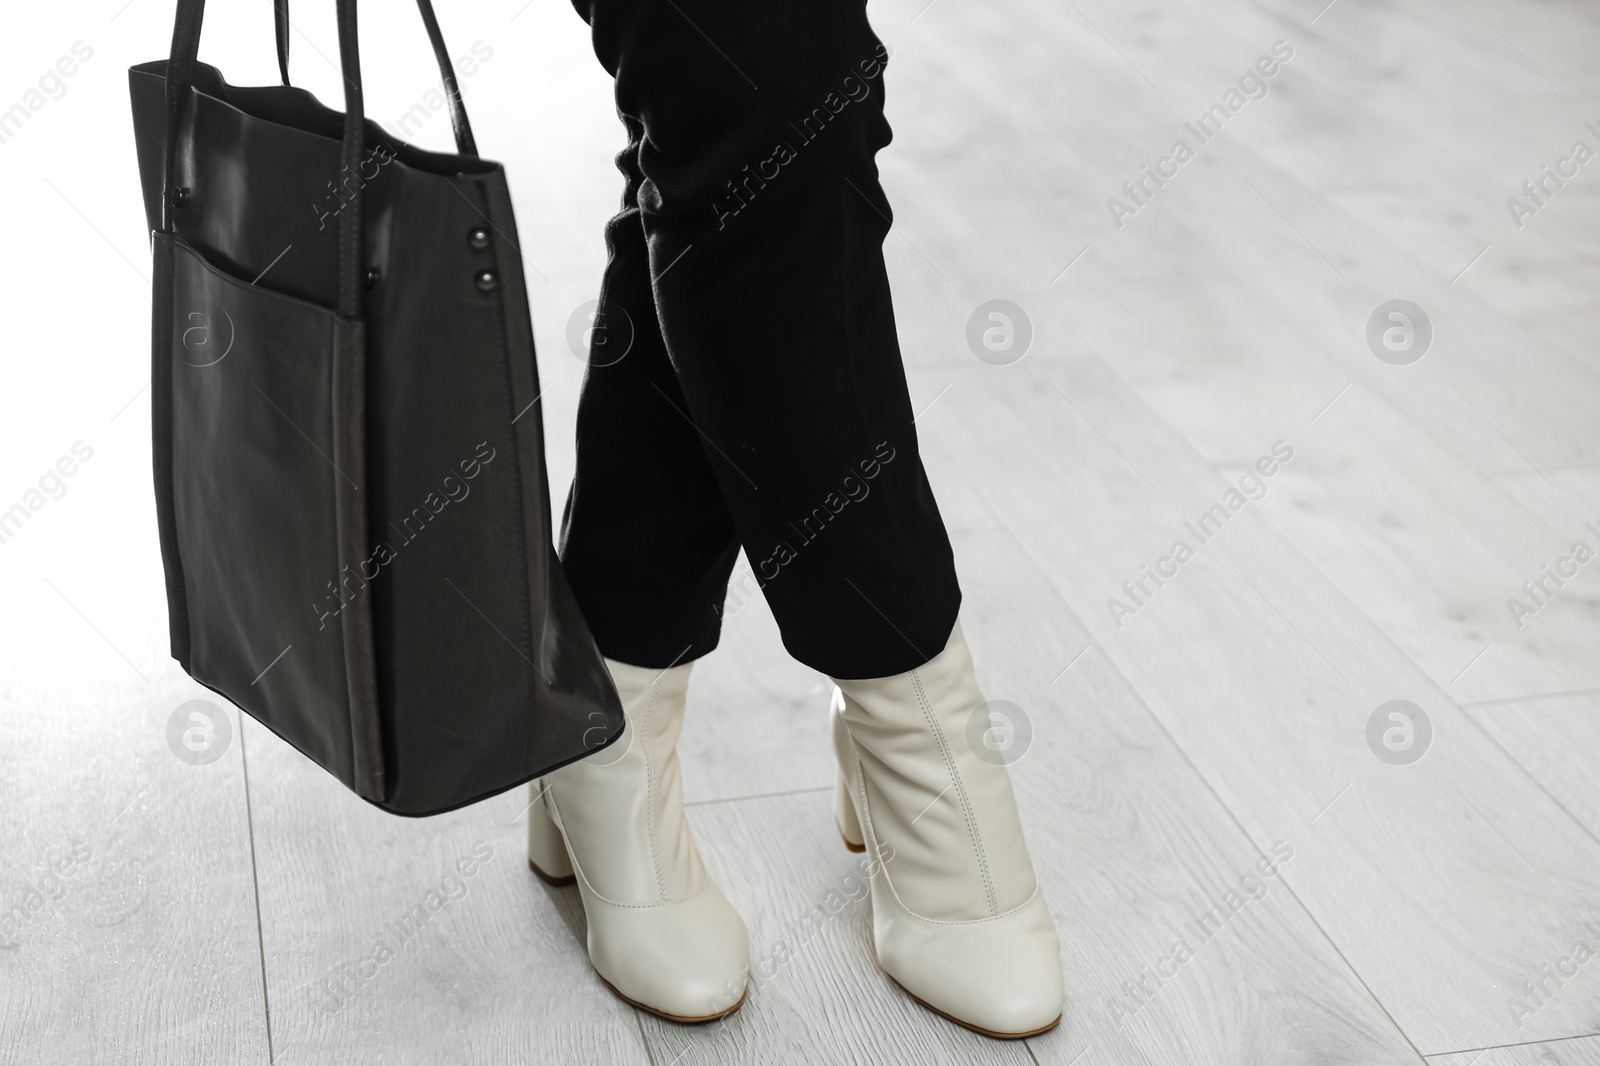 Photo of Woman wearing stylish leather shoes with bag indoors, closeup. Space for text